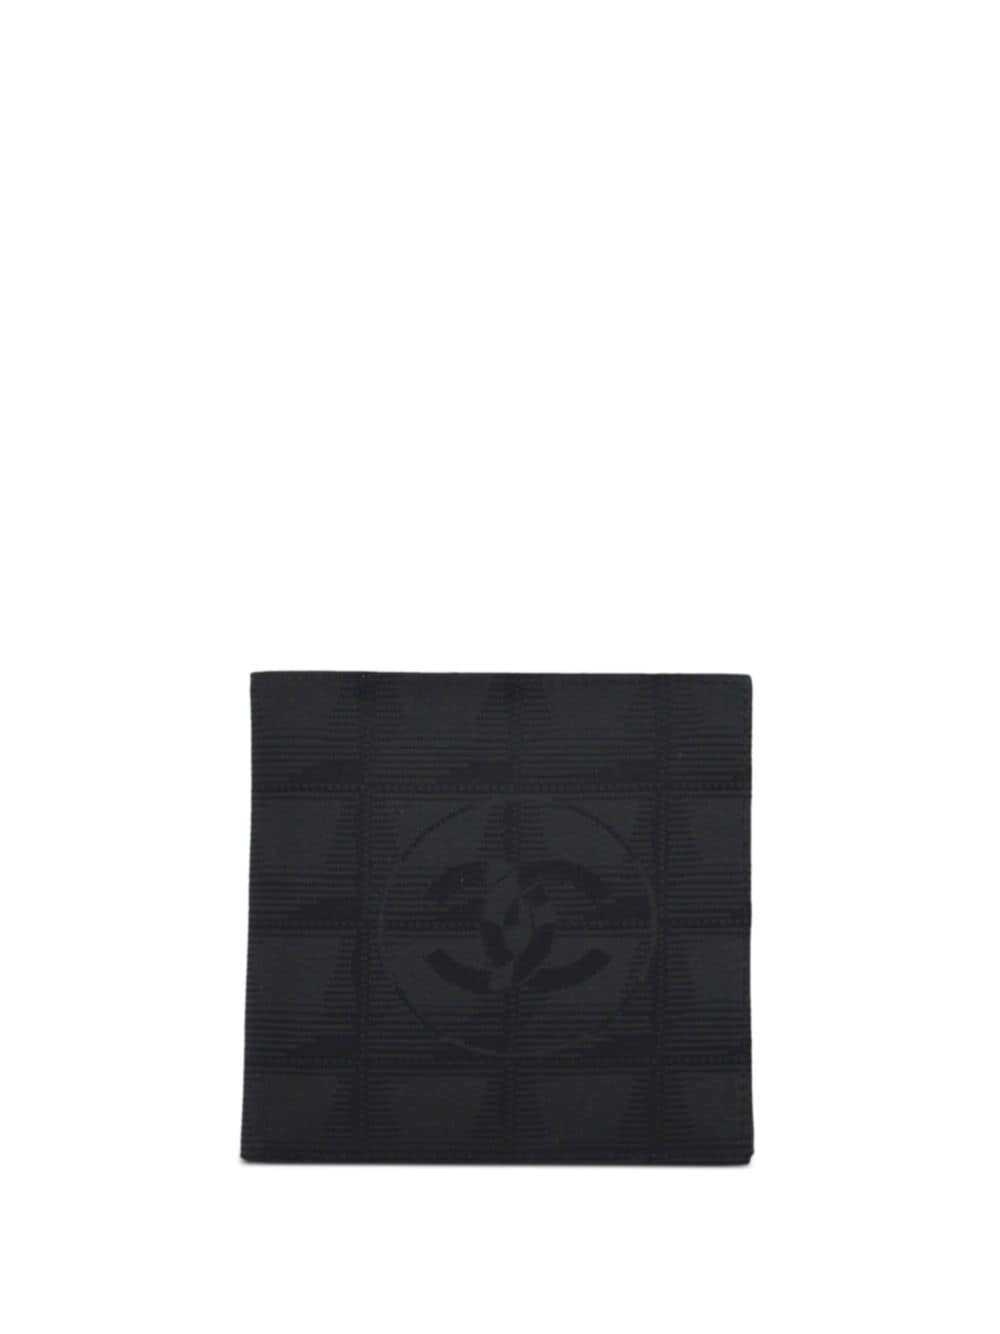 CHANEL Pre-Owned 2003 CC Travel Line wallet - Bla… - image 1